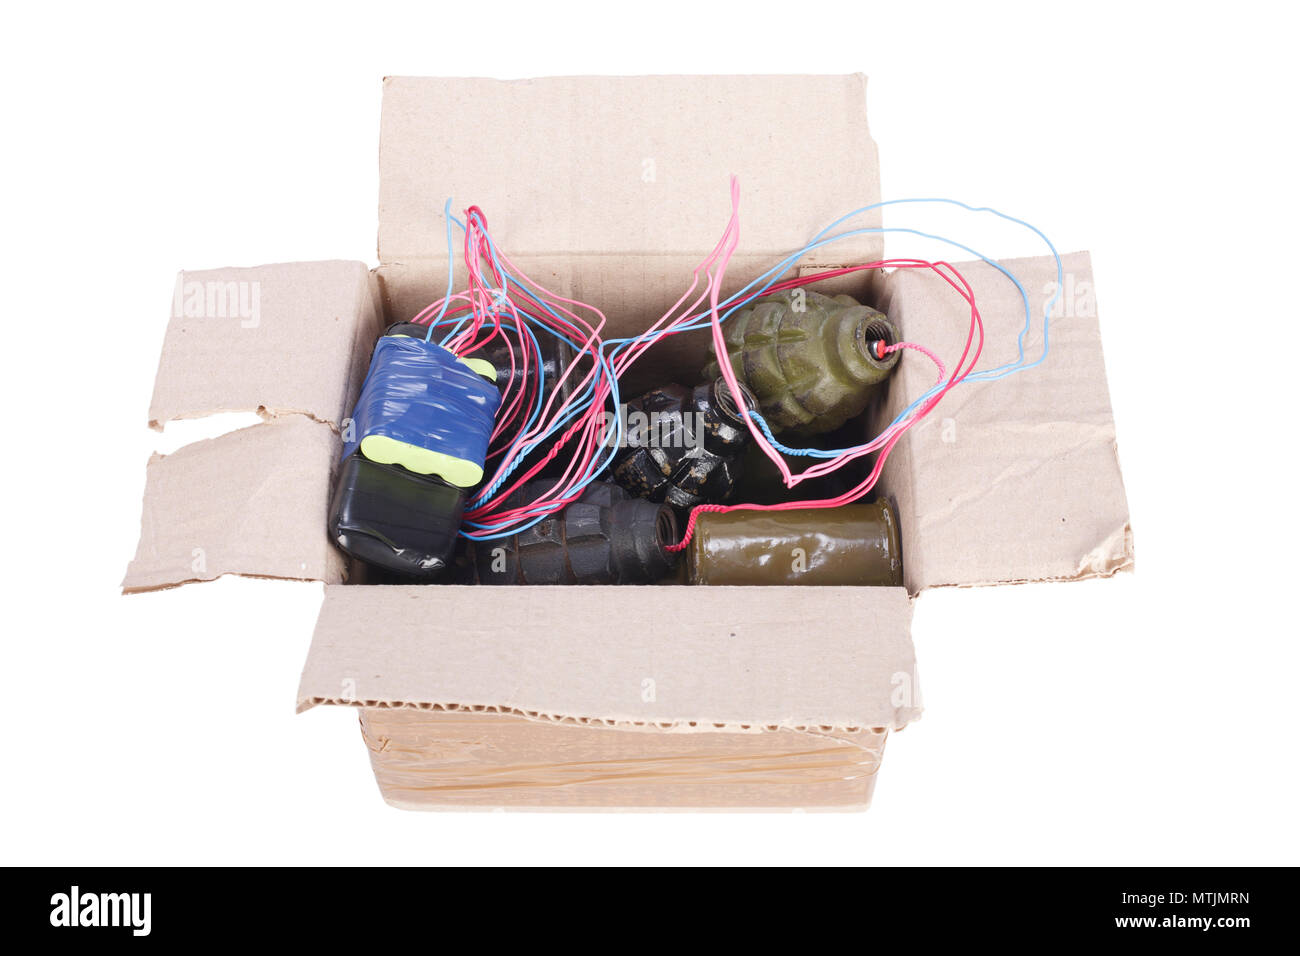 IED - Improvised Explosive Device in mailbox isolated on white Stock Photo